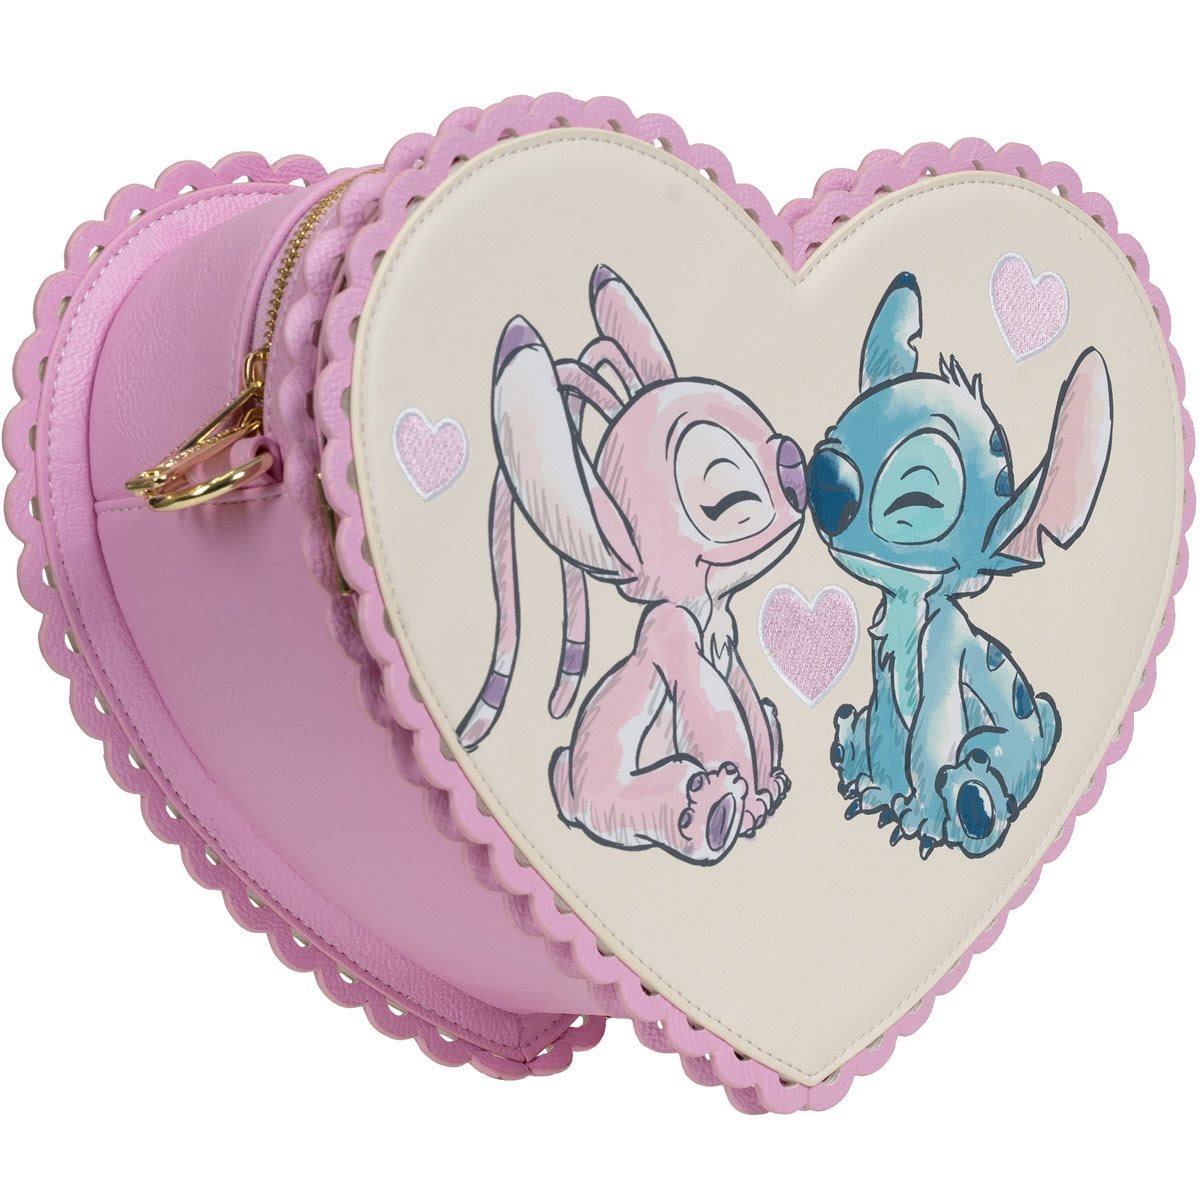 Disney Lilo and Stitch Angel Heart Kisses2 Weekender Tote Bag by